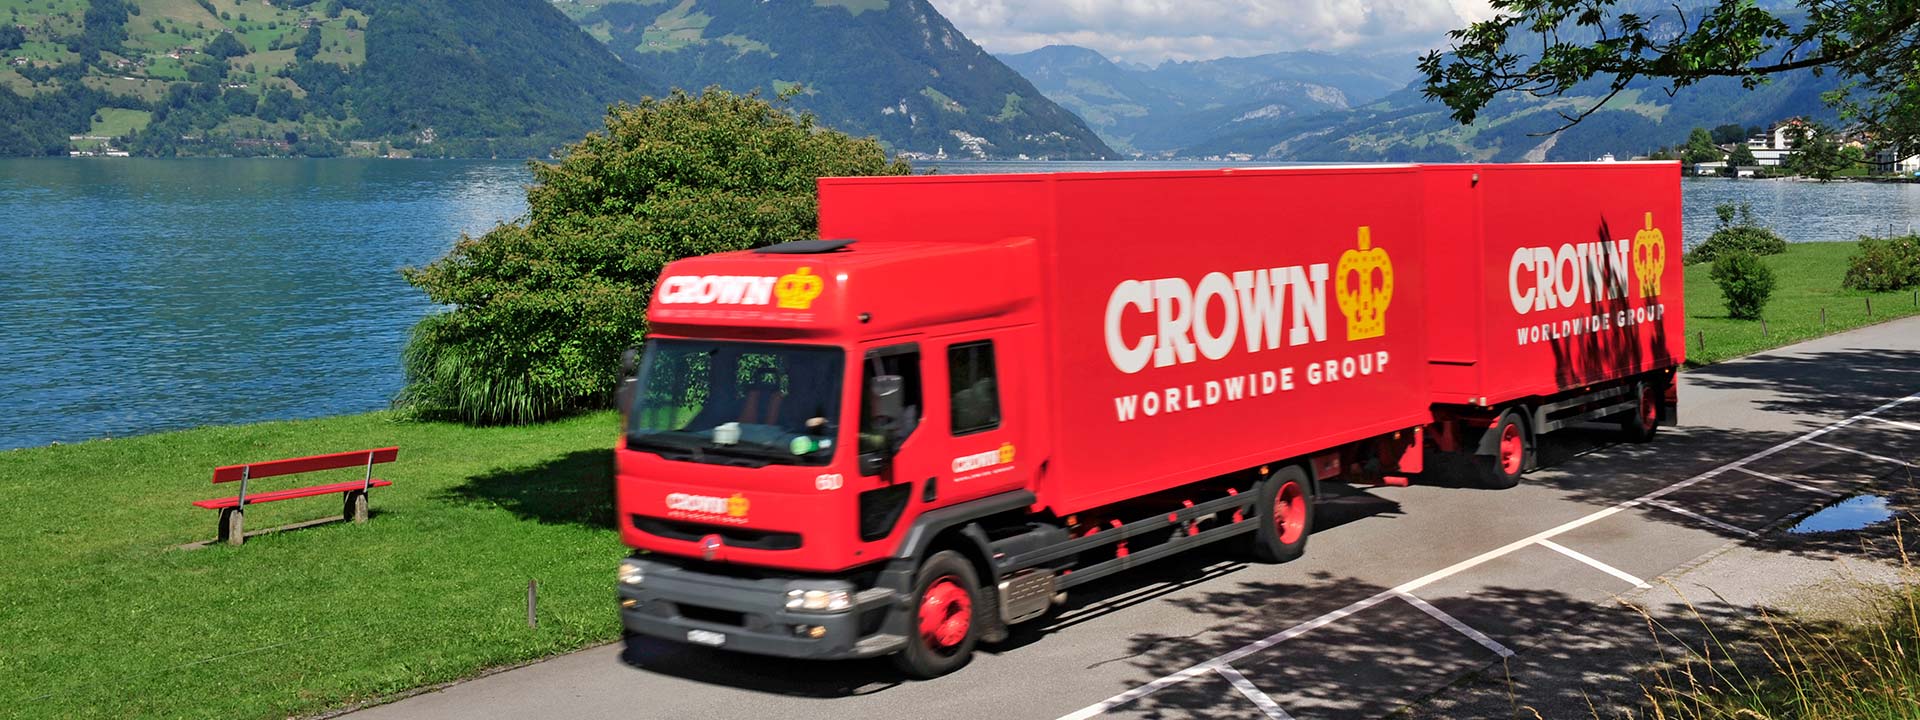 Red Crown Worldwide Group lorries in front of lake and mountains